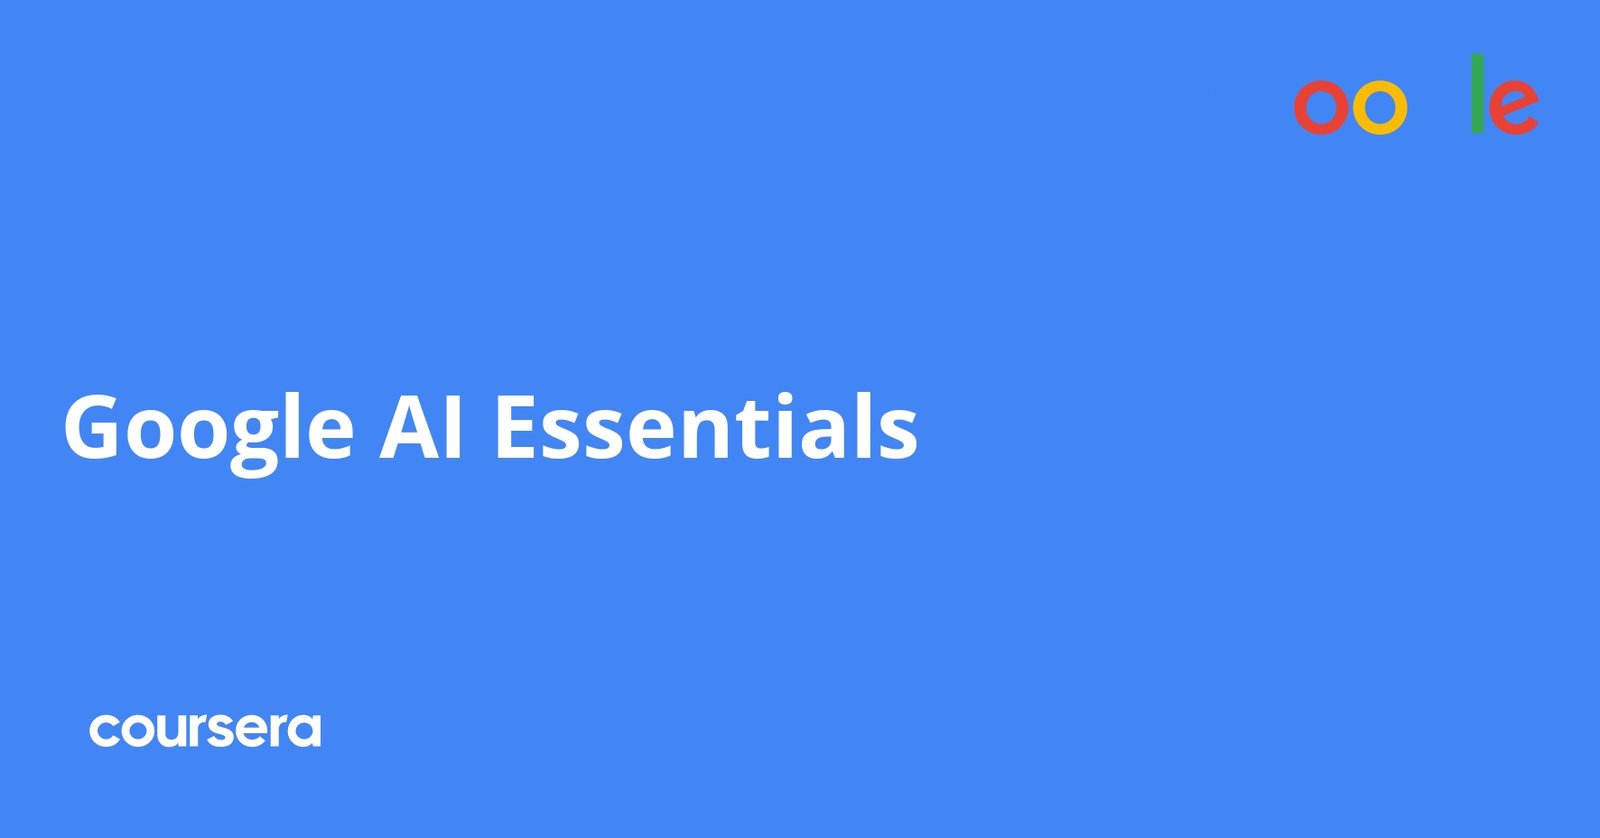 Level Up Your Work: Google Unveils Free AI Essentials Course